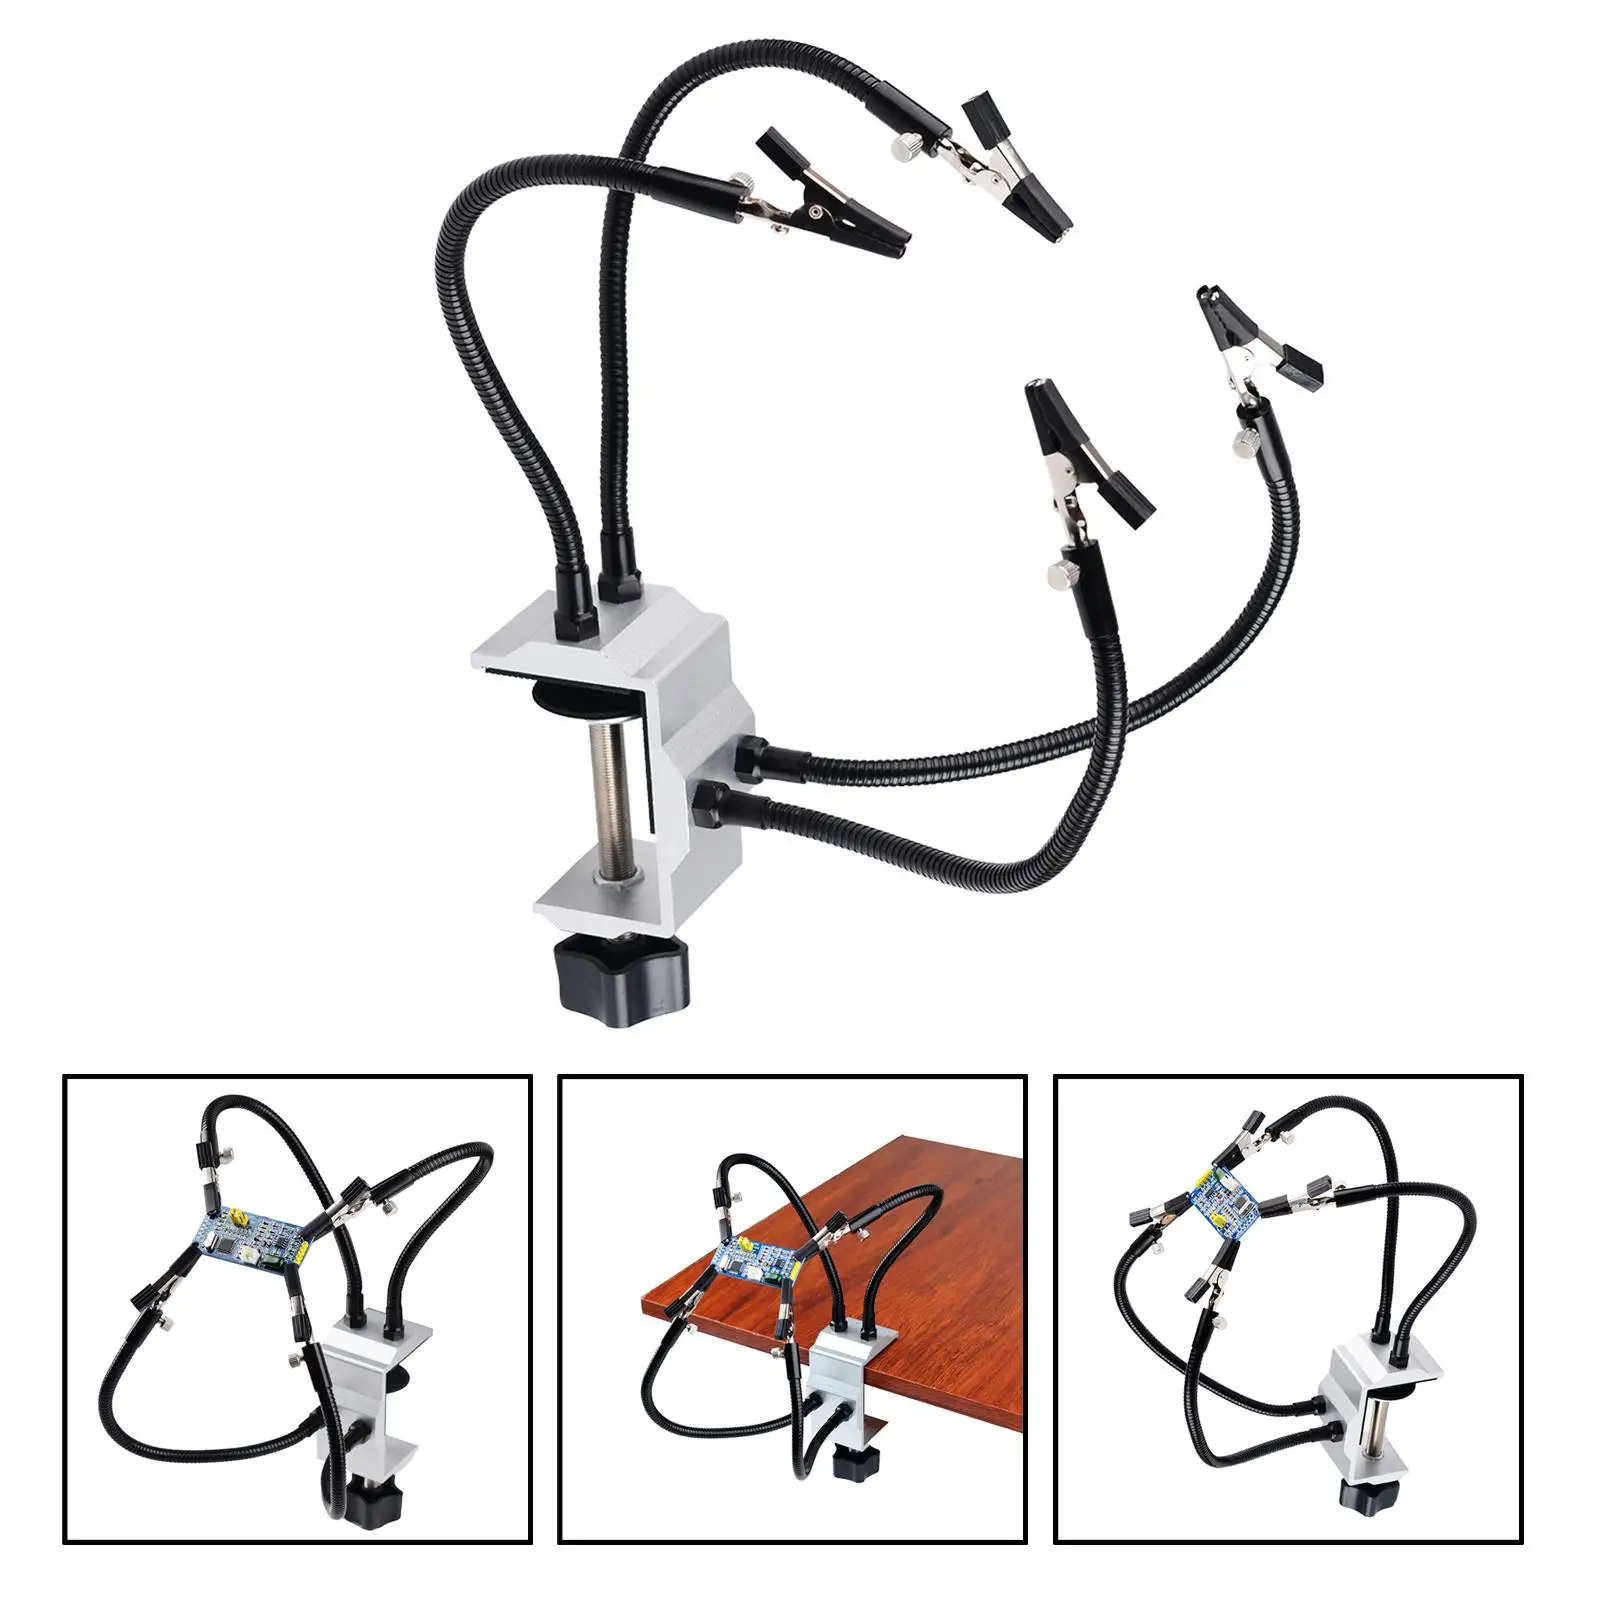 Soldering Third Hand 4 Flexible Universal Arms Tabletop Clamp Base Helping Hands for Repair Arts Craft Soldering Station Holder